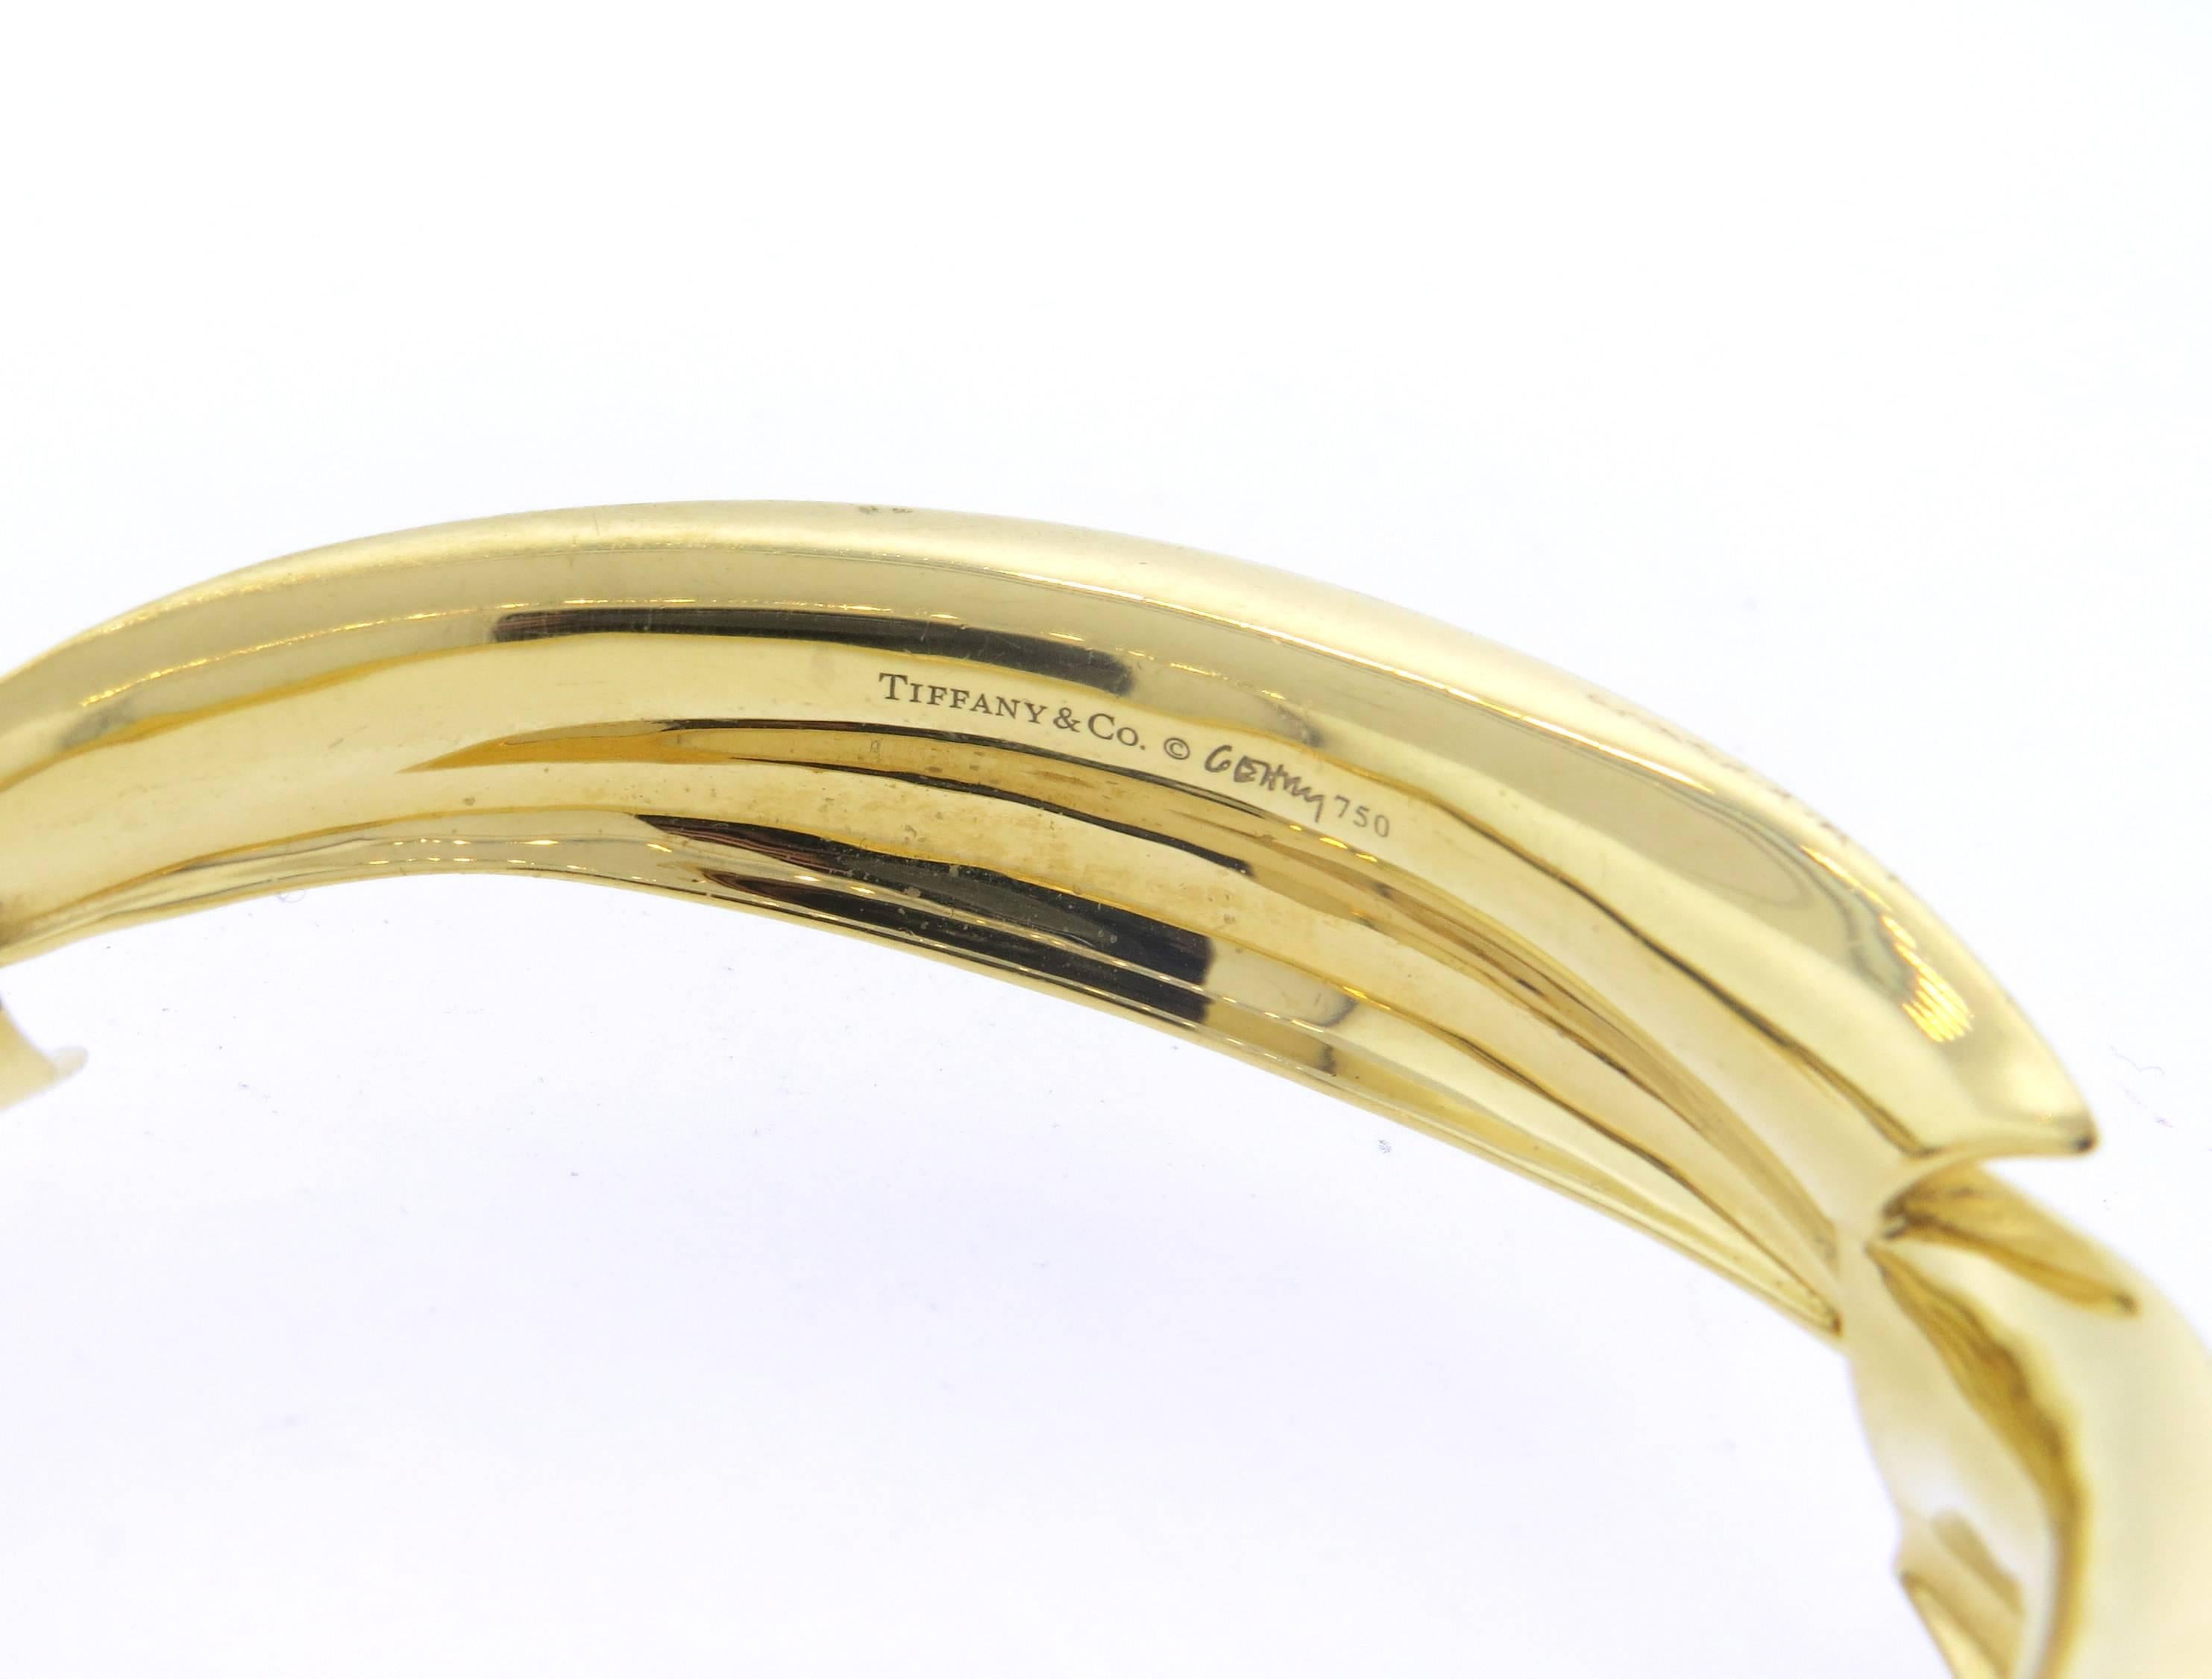 AN 18k yellow gold bangle bracelet, crafted by Frank Gehry for Tiffany & Co, featuring signature Fish motif design. Bangle will fit up to 7 1/4' wrist and is 16mm wide. Marked: Tiffany & Co,  Gehry 750. Weight of the piece - 53.2 grams 